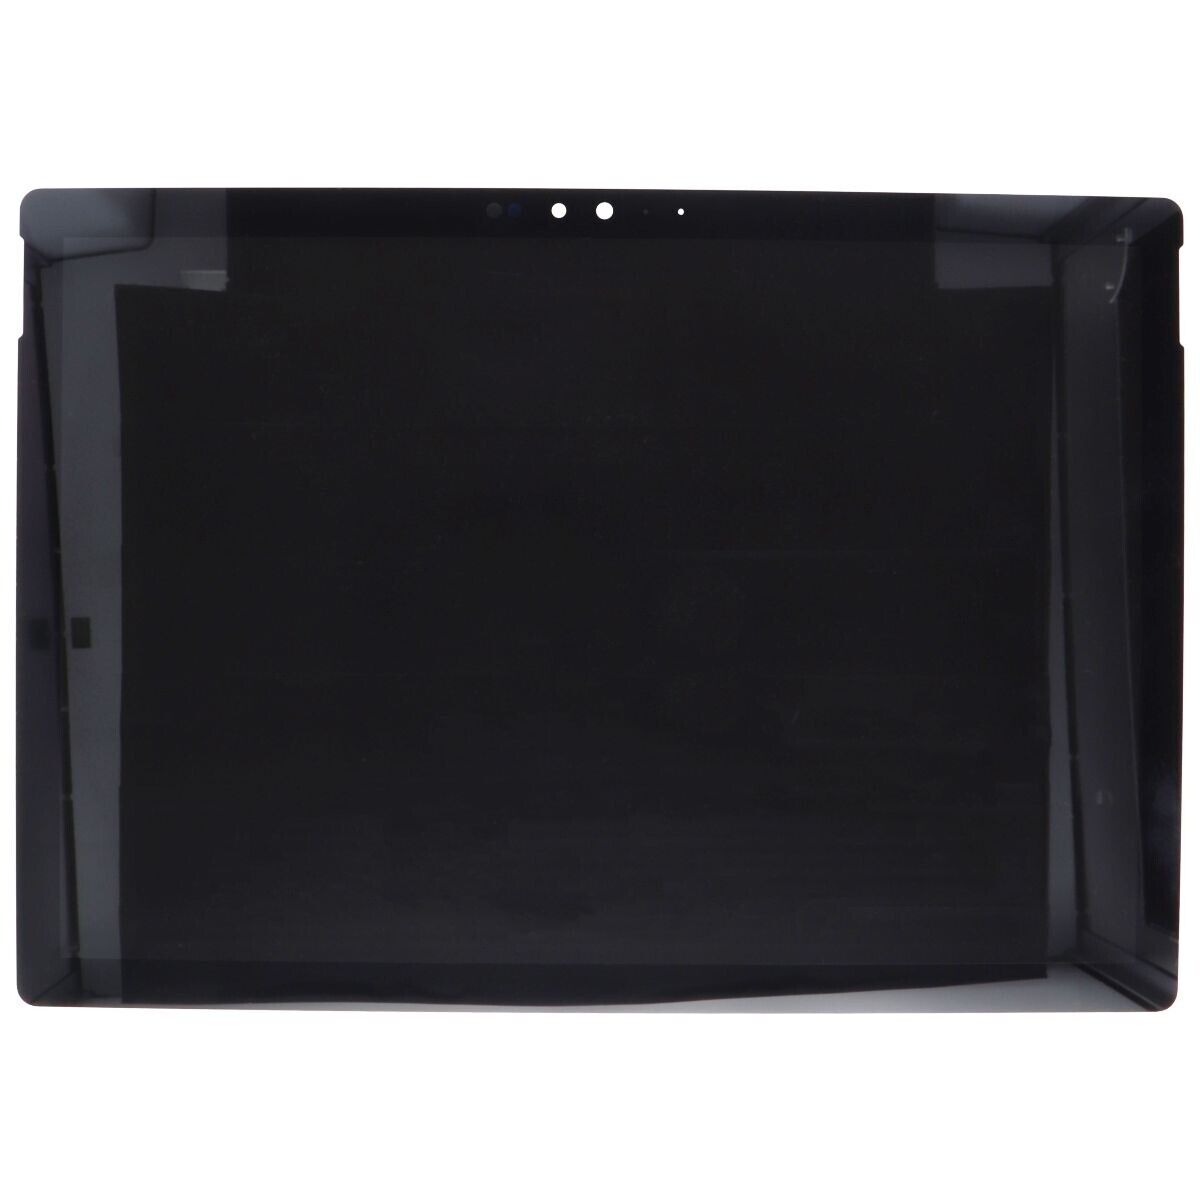 Repair Part - LCD Display Touch Screen For Microsoft Surface Book 2 1832 1834